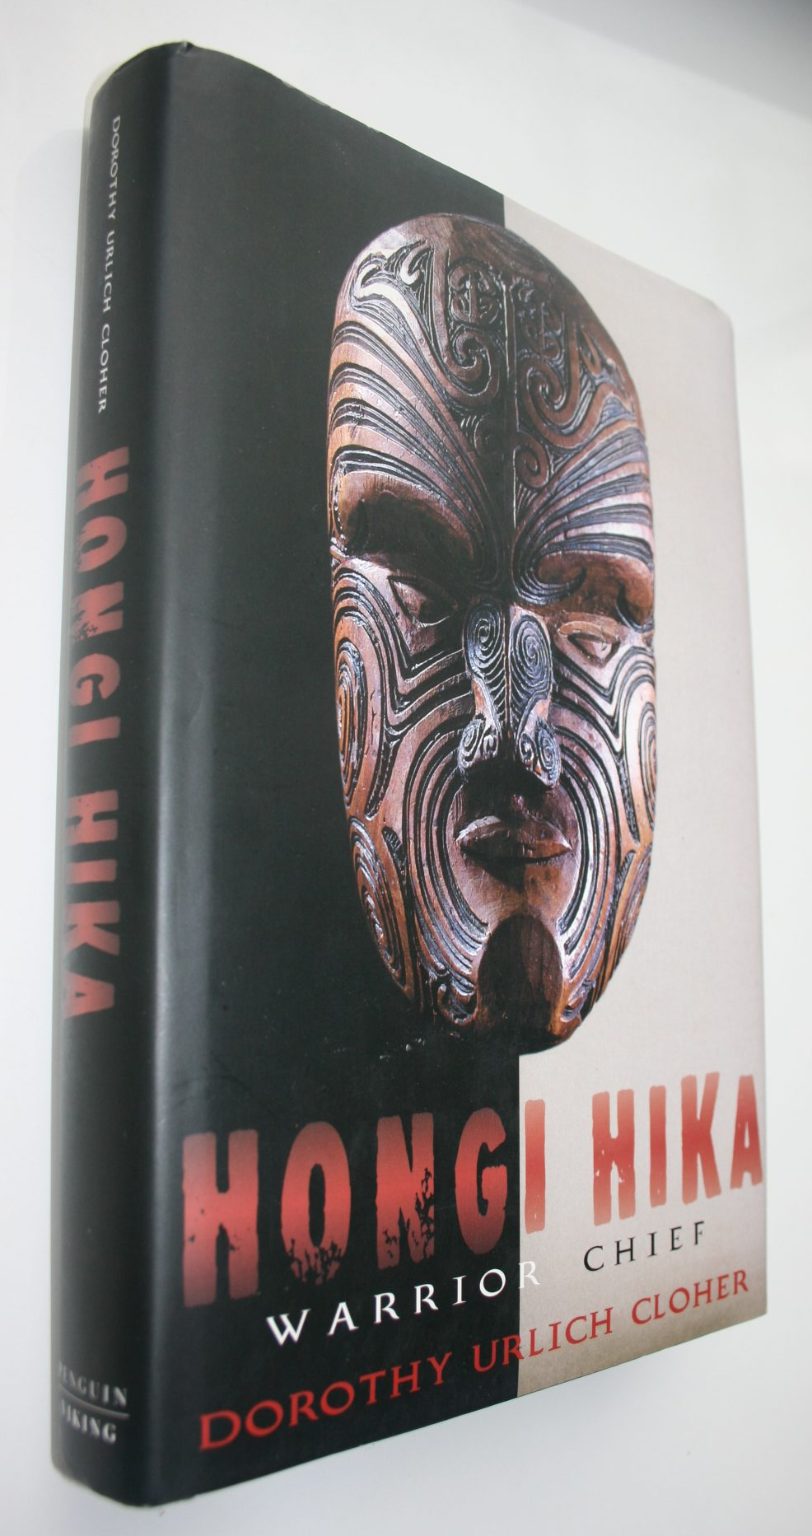 Hongi Hika: Warrior Chief - by Dorothy Urlich Cloher. [Signed First Edition] SIGNED BY AUTHOR.